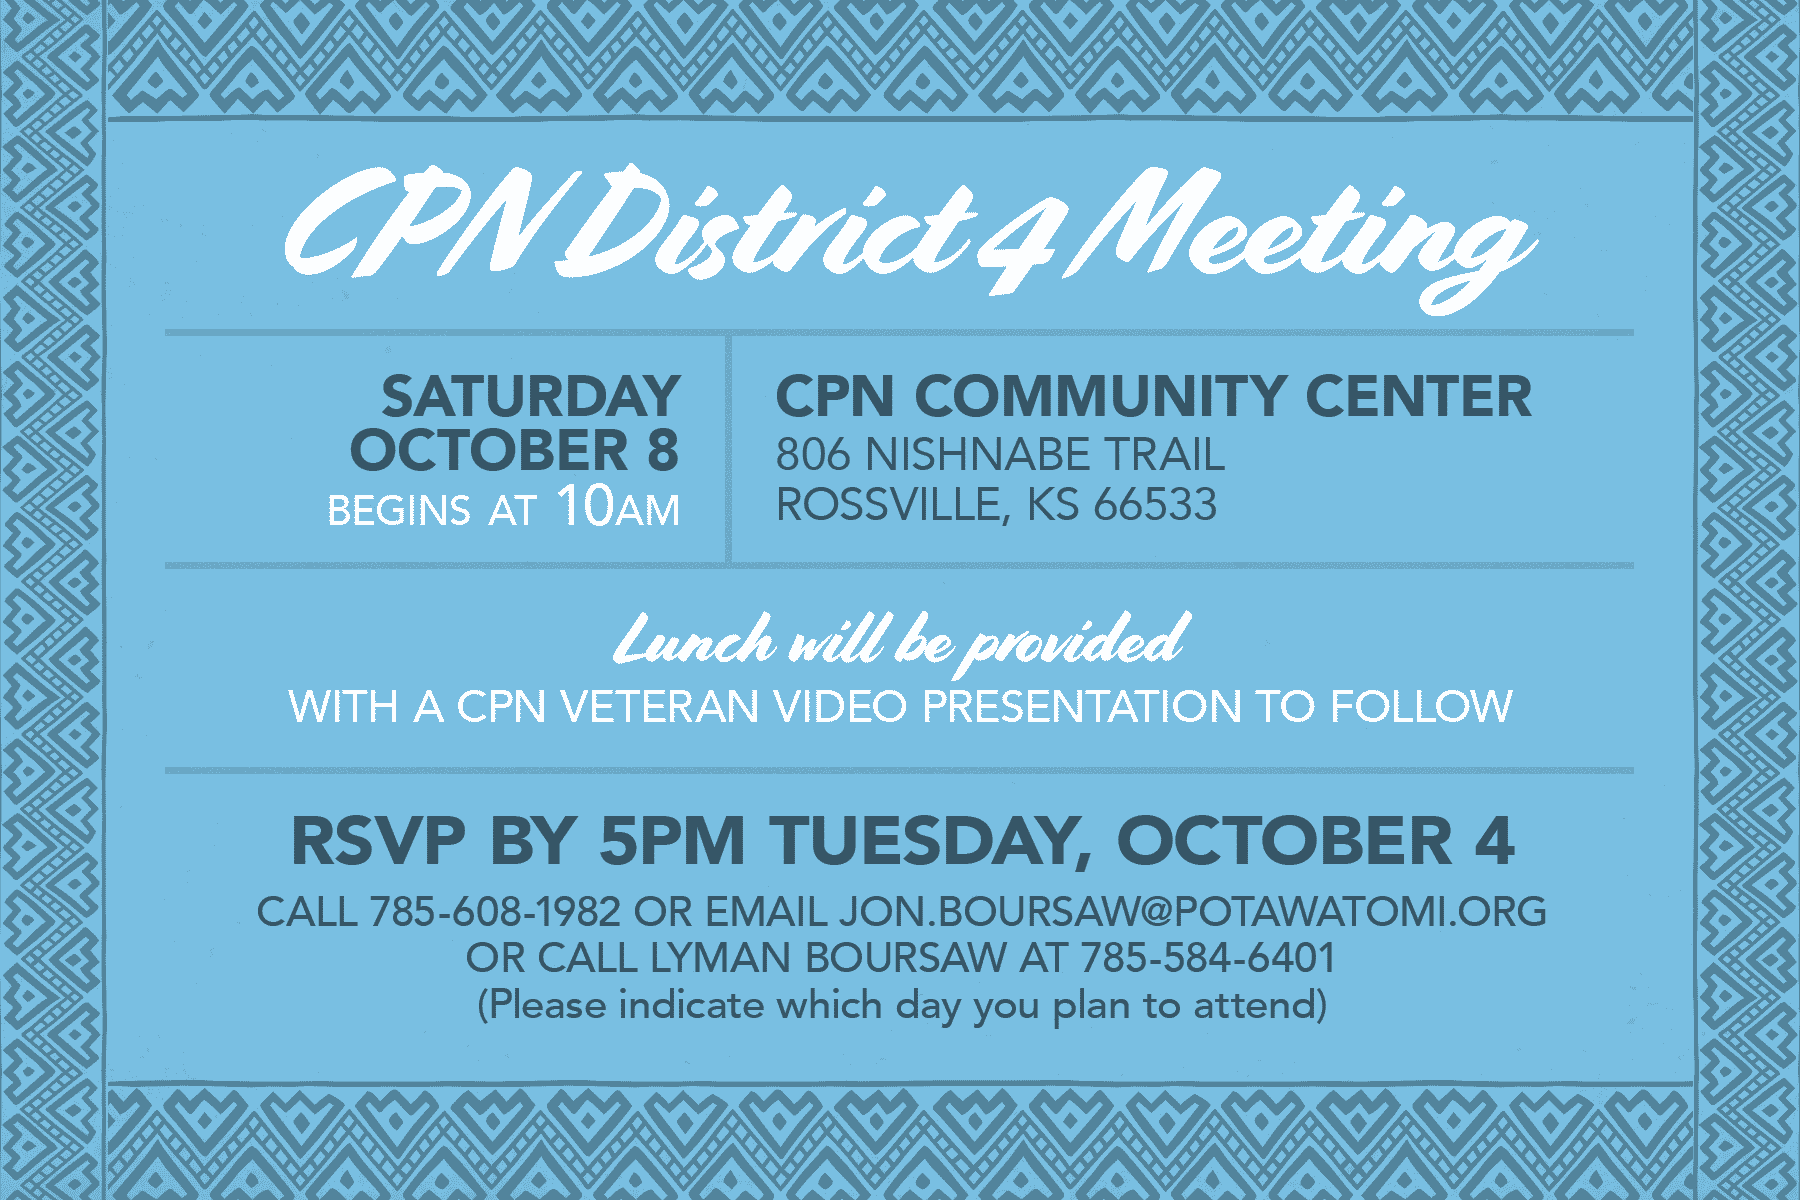 Blue postcard with geometric patterning around the edges inviting CPN members to a District 4 meeting on October 8.